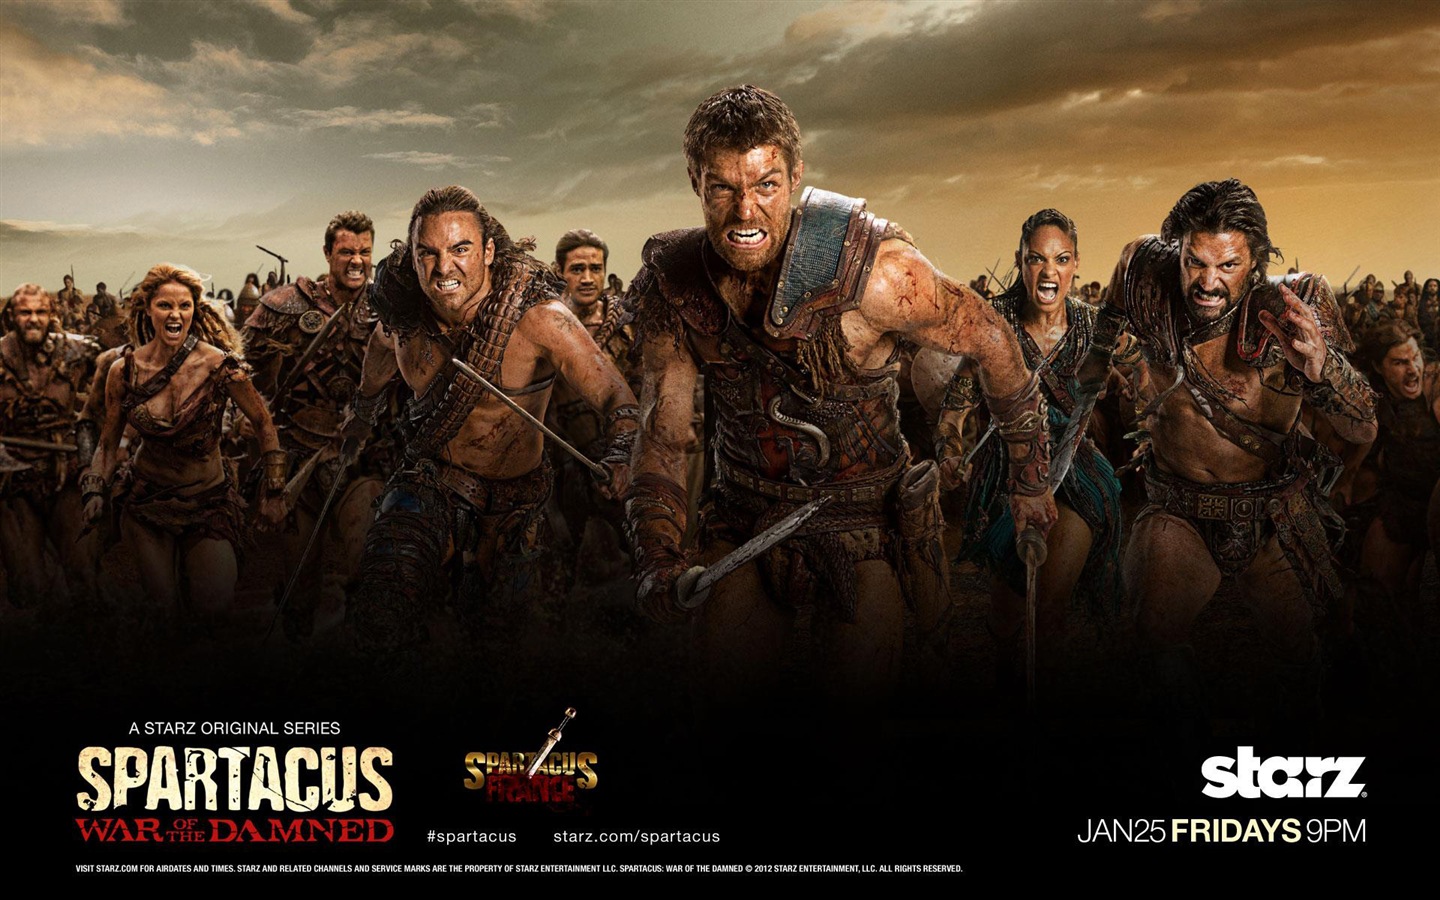 Spartacus: War of the Damned HD wallpapers #1 - 1440x900